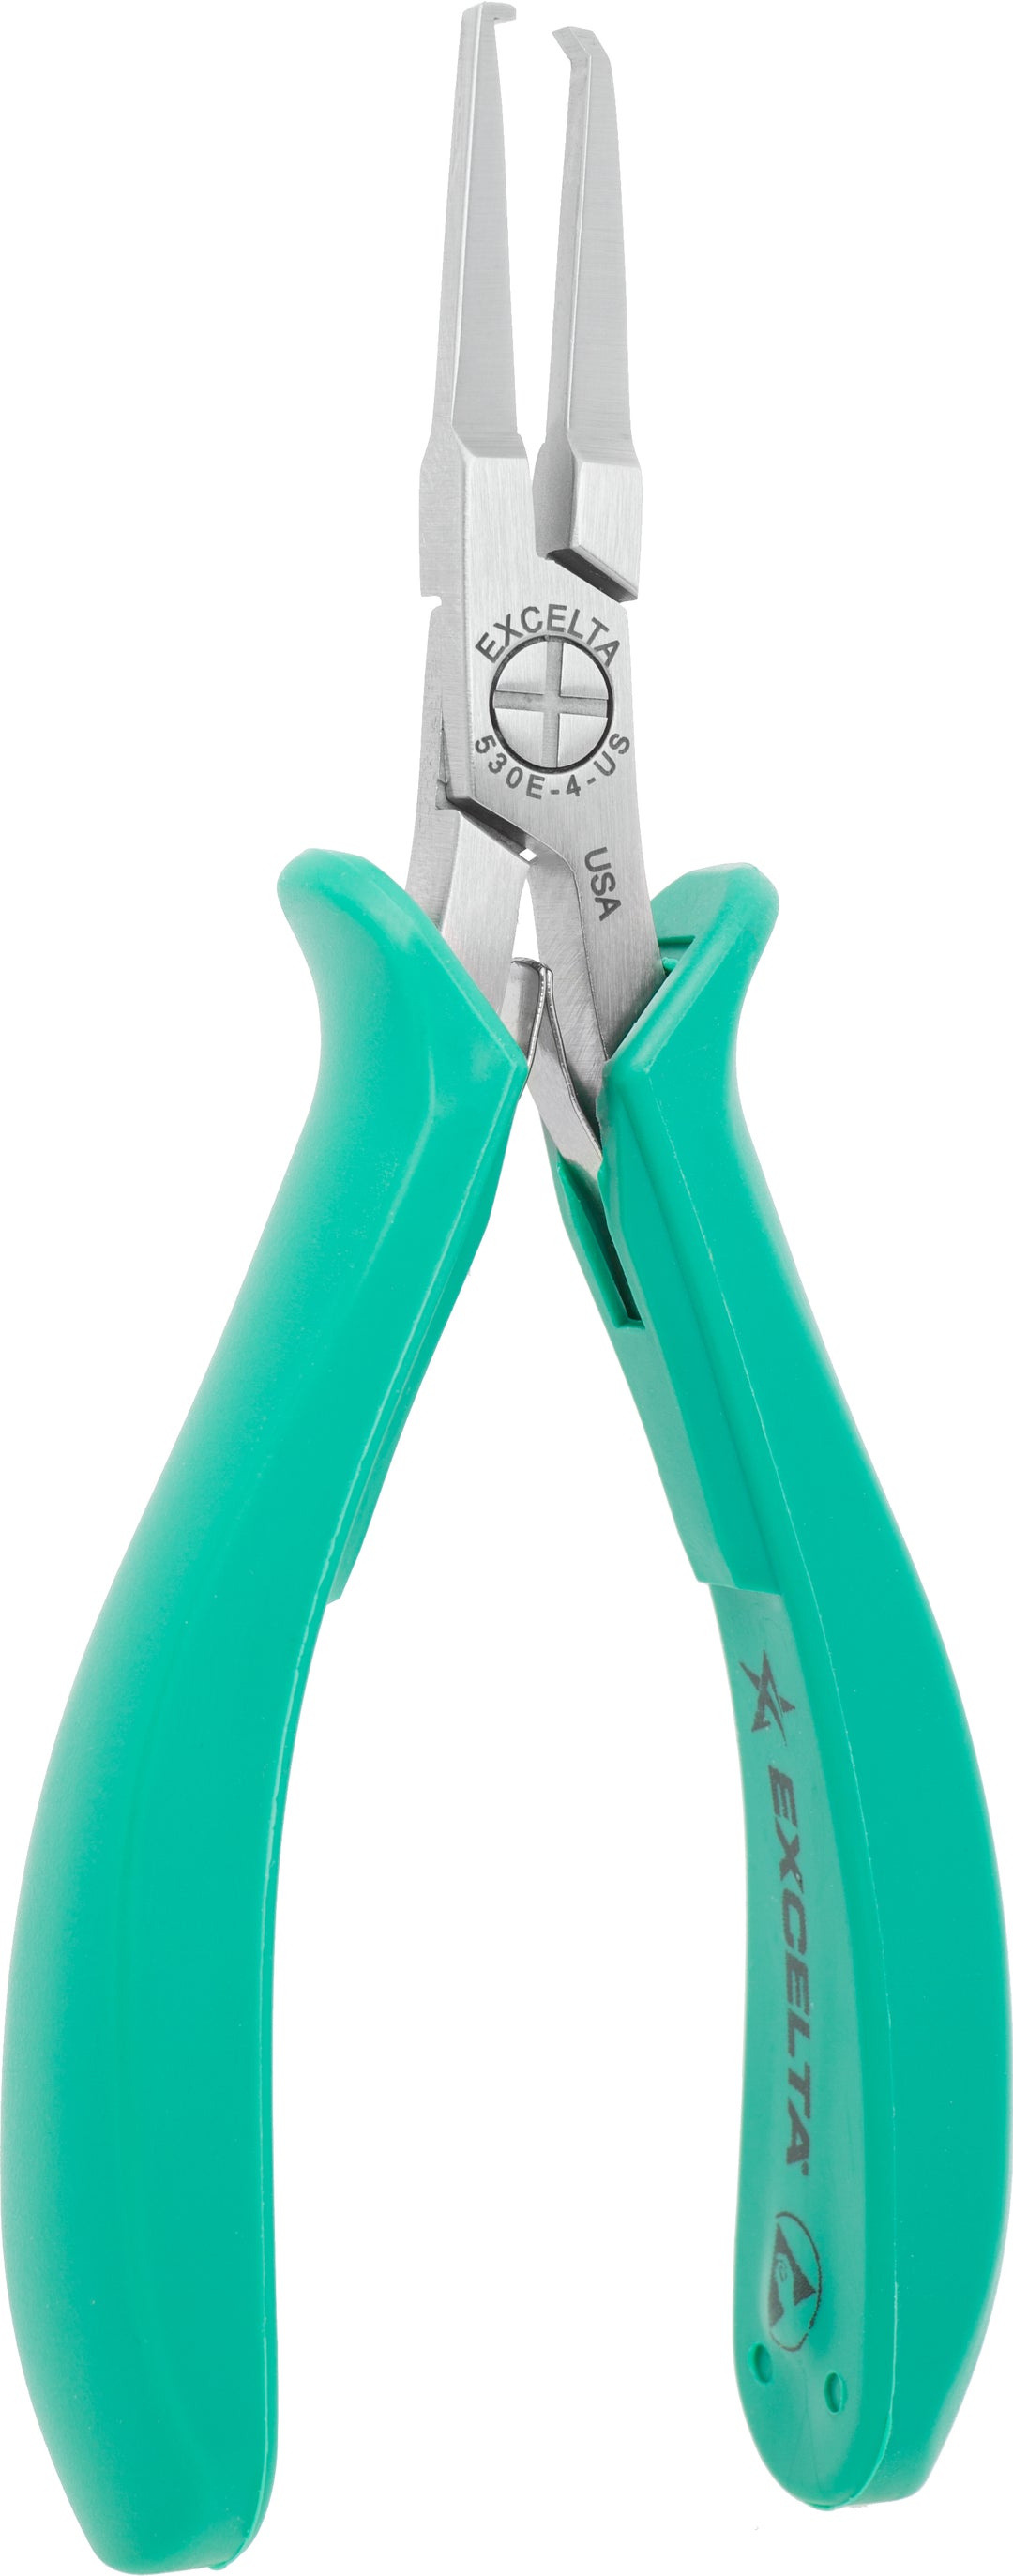 Excelta 530E-4-US-040 Cutters - Standoff Shear Small Frame -- .040" Standoff - Long Thin Jaw